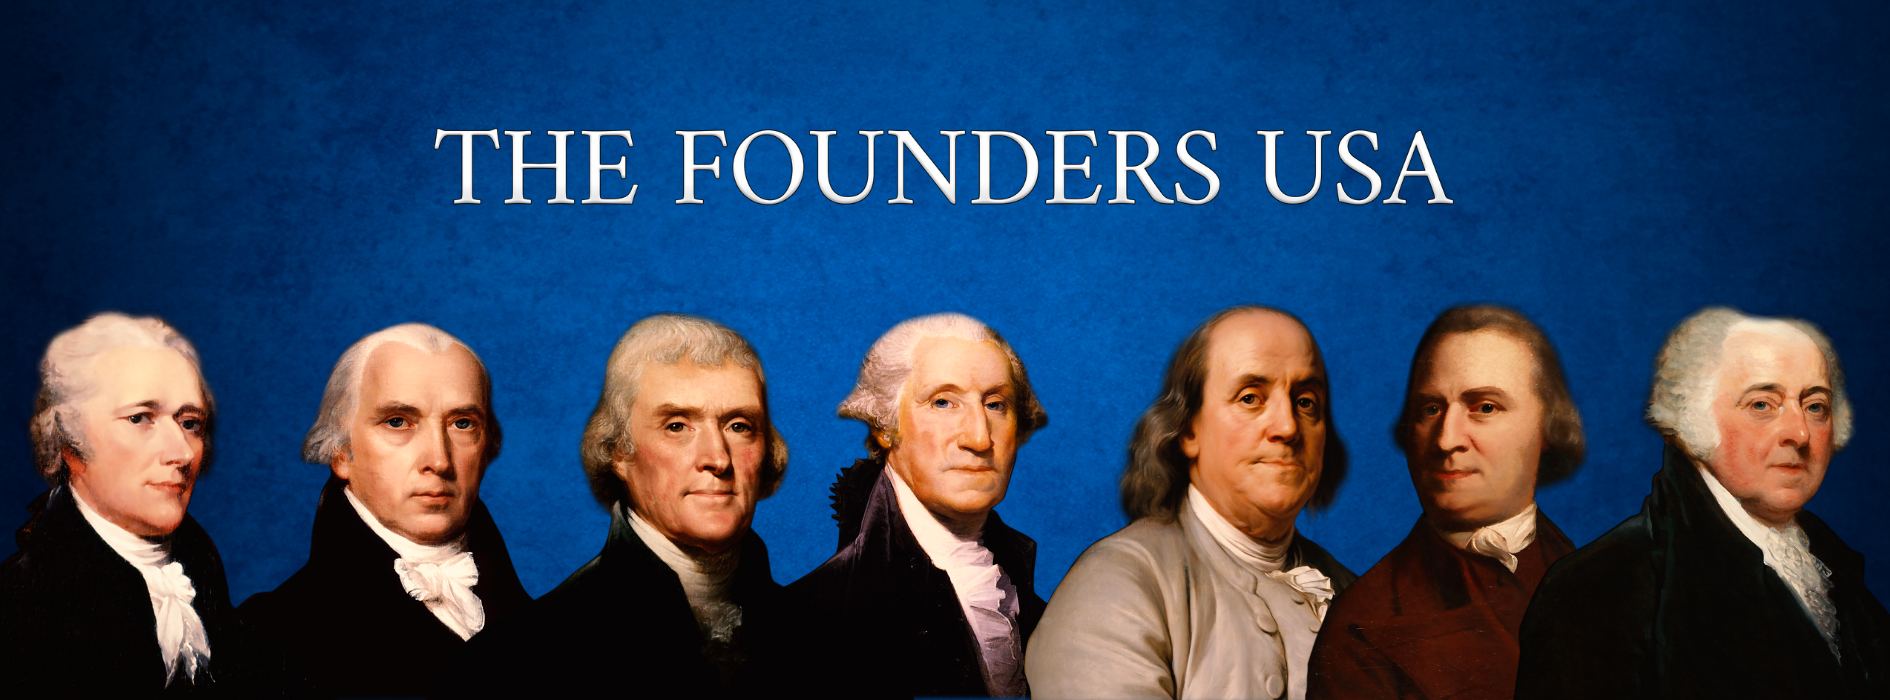 The Founders USA - Reviews